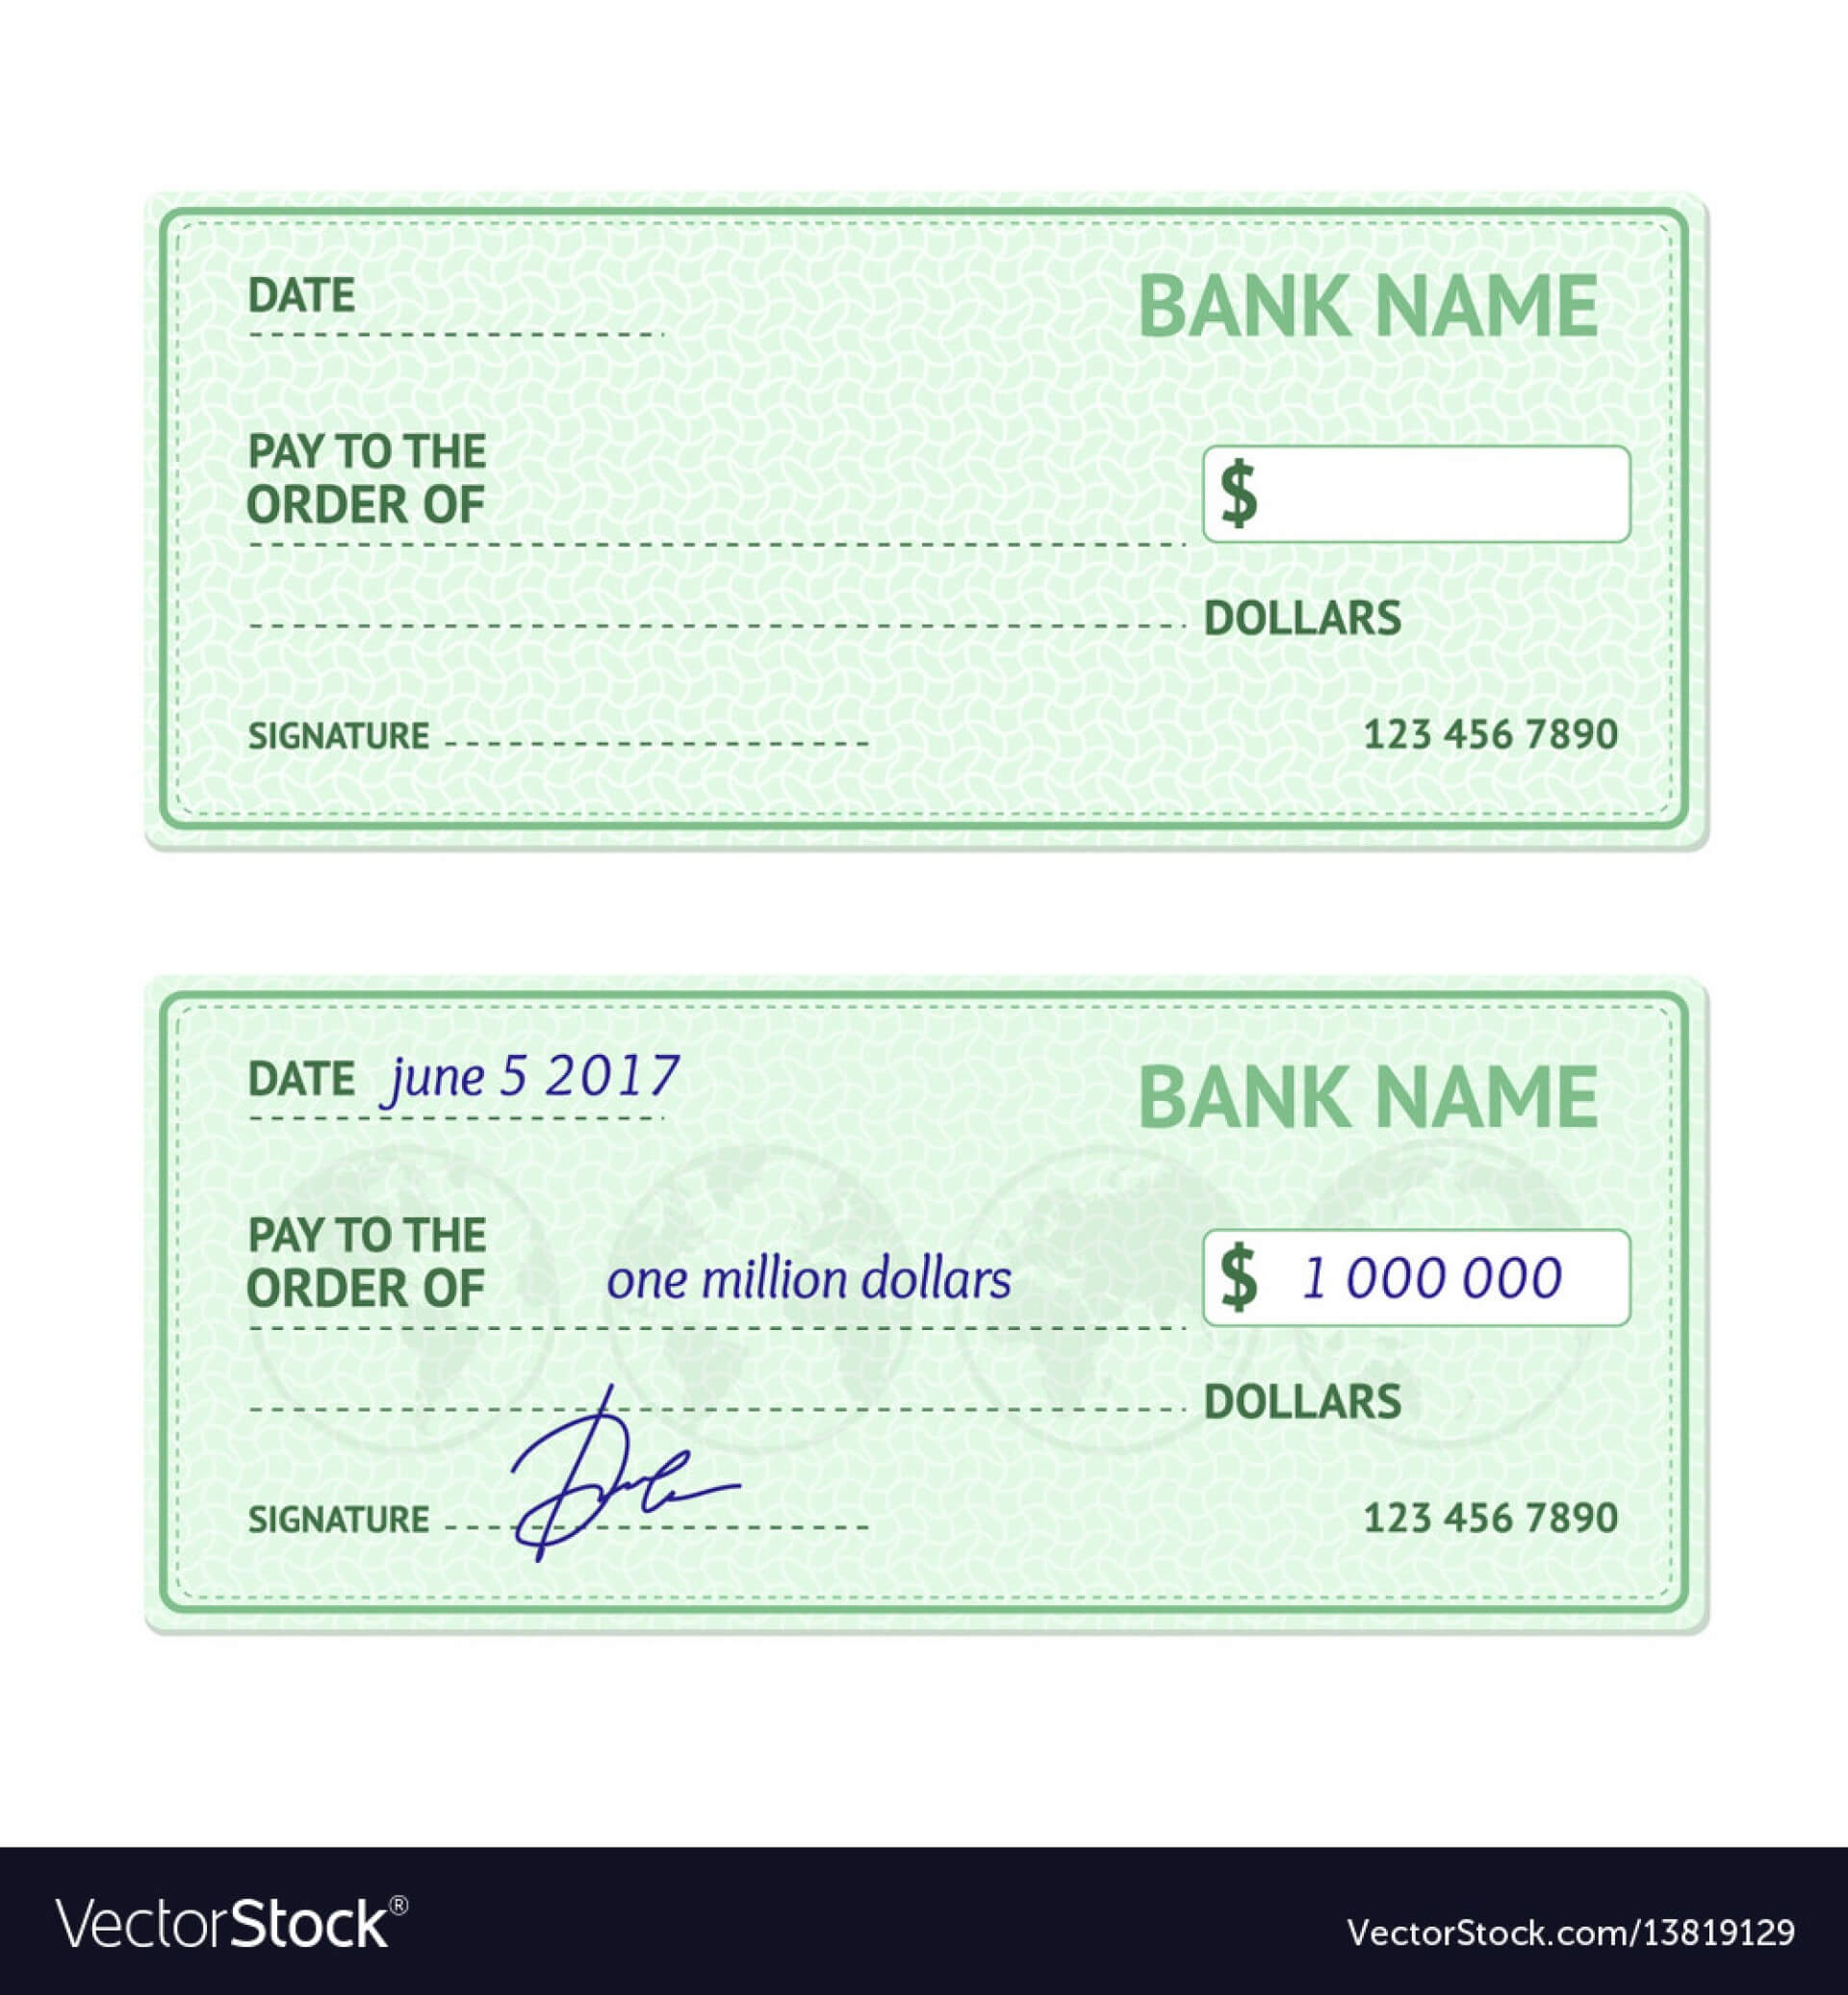 012 Blank Business Check Template Ideas Regarding Fun Awful Intended For Fun Blank Cheque Template